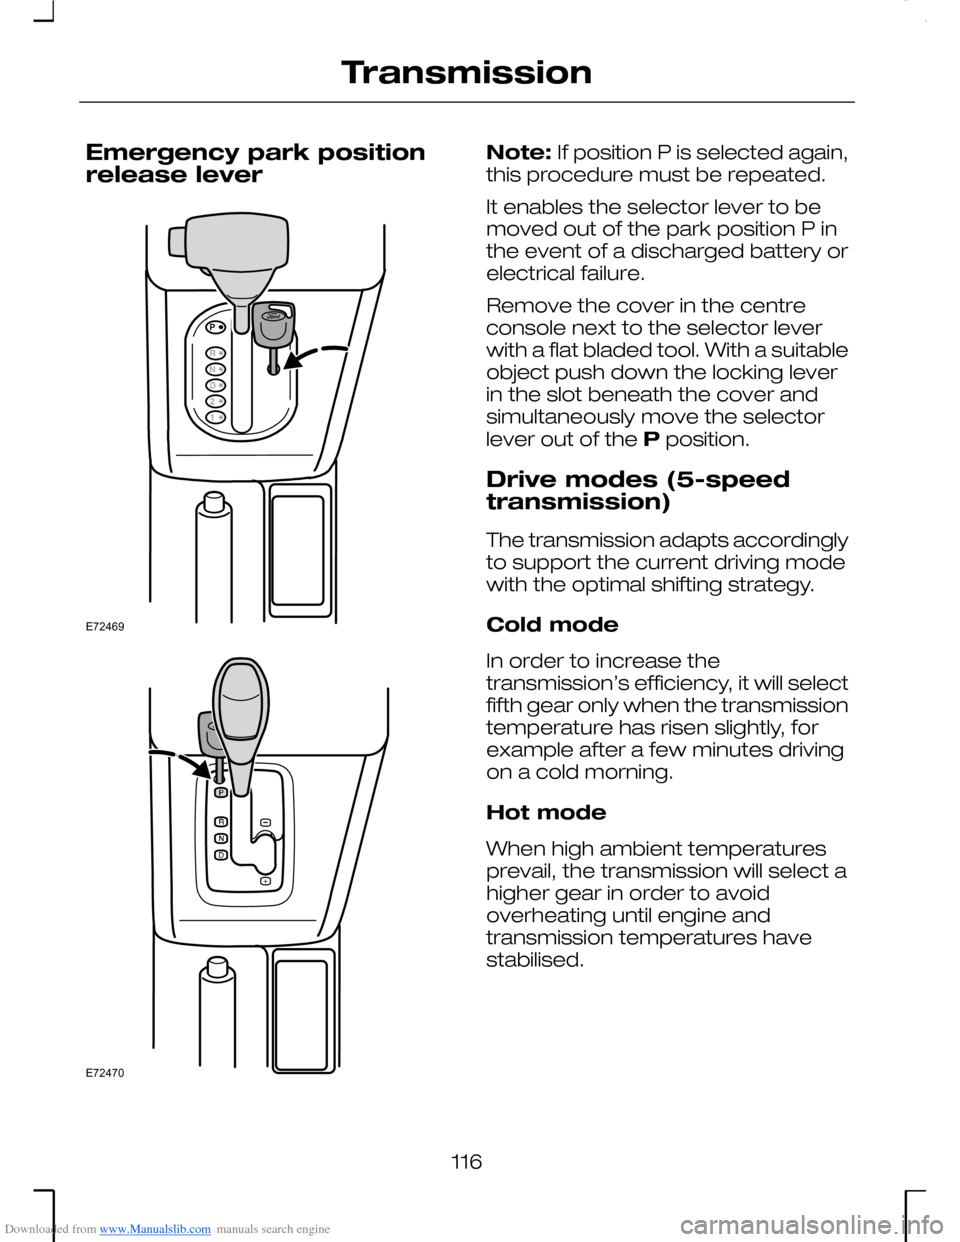 FORD MONDEO 2006 2.G Owners Manual Downloaded from www.Manualslib.com manuals search engine Emergency park positionrelease lever
Note: If position P is selected again,this procedure must be repeated.
It enables the selector lever to be